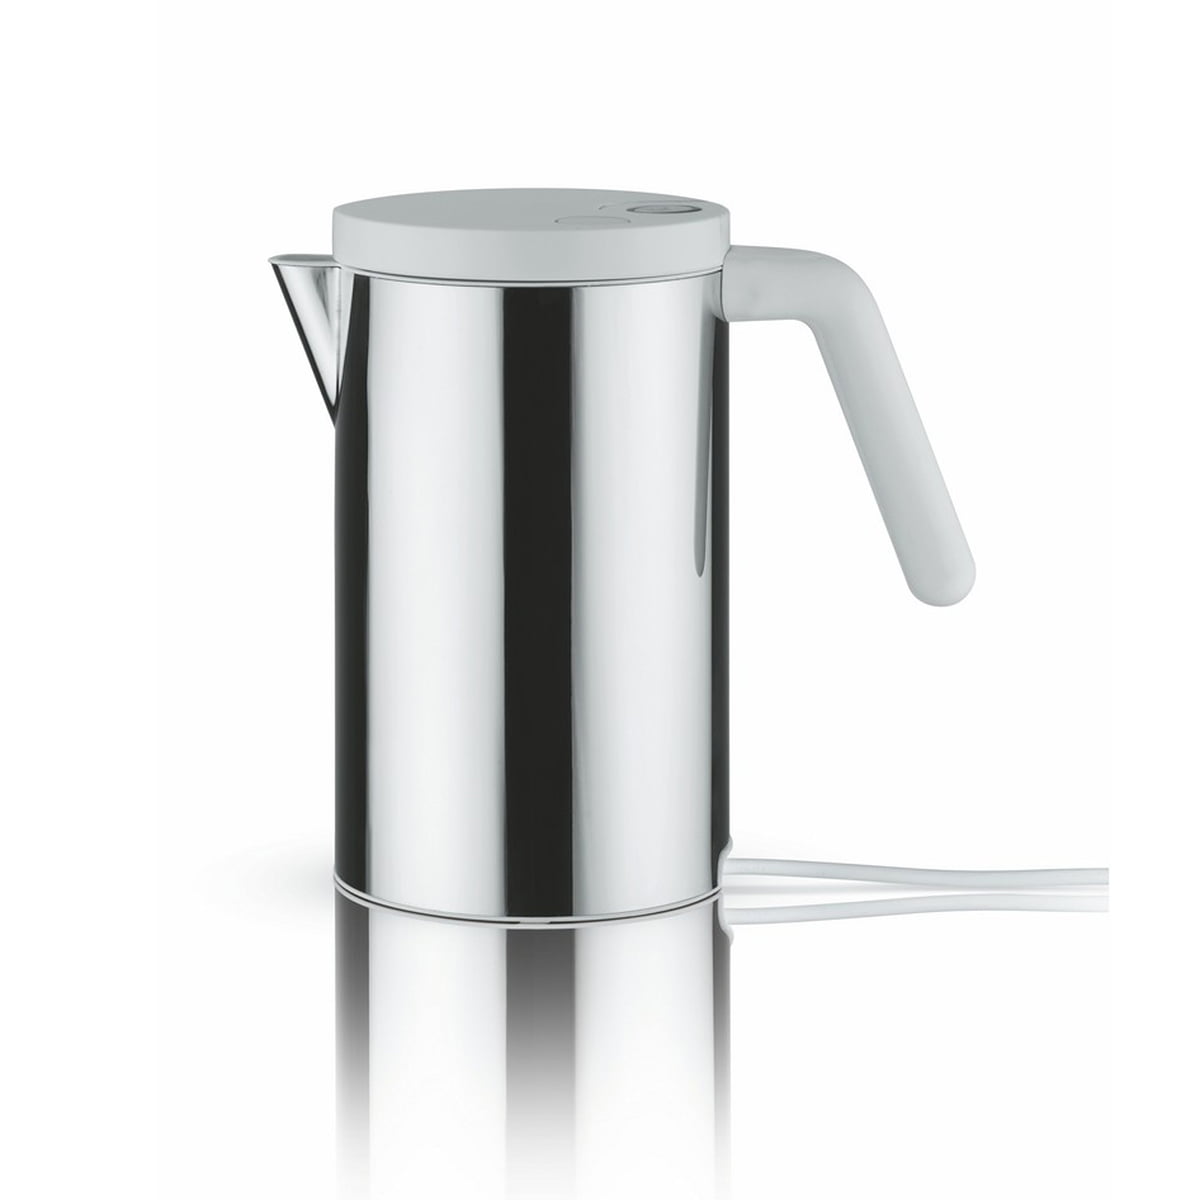 Hot.it electric kettle by Alessi